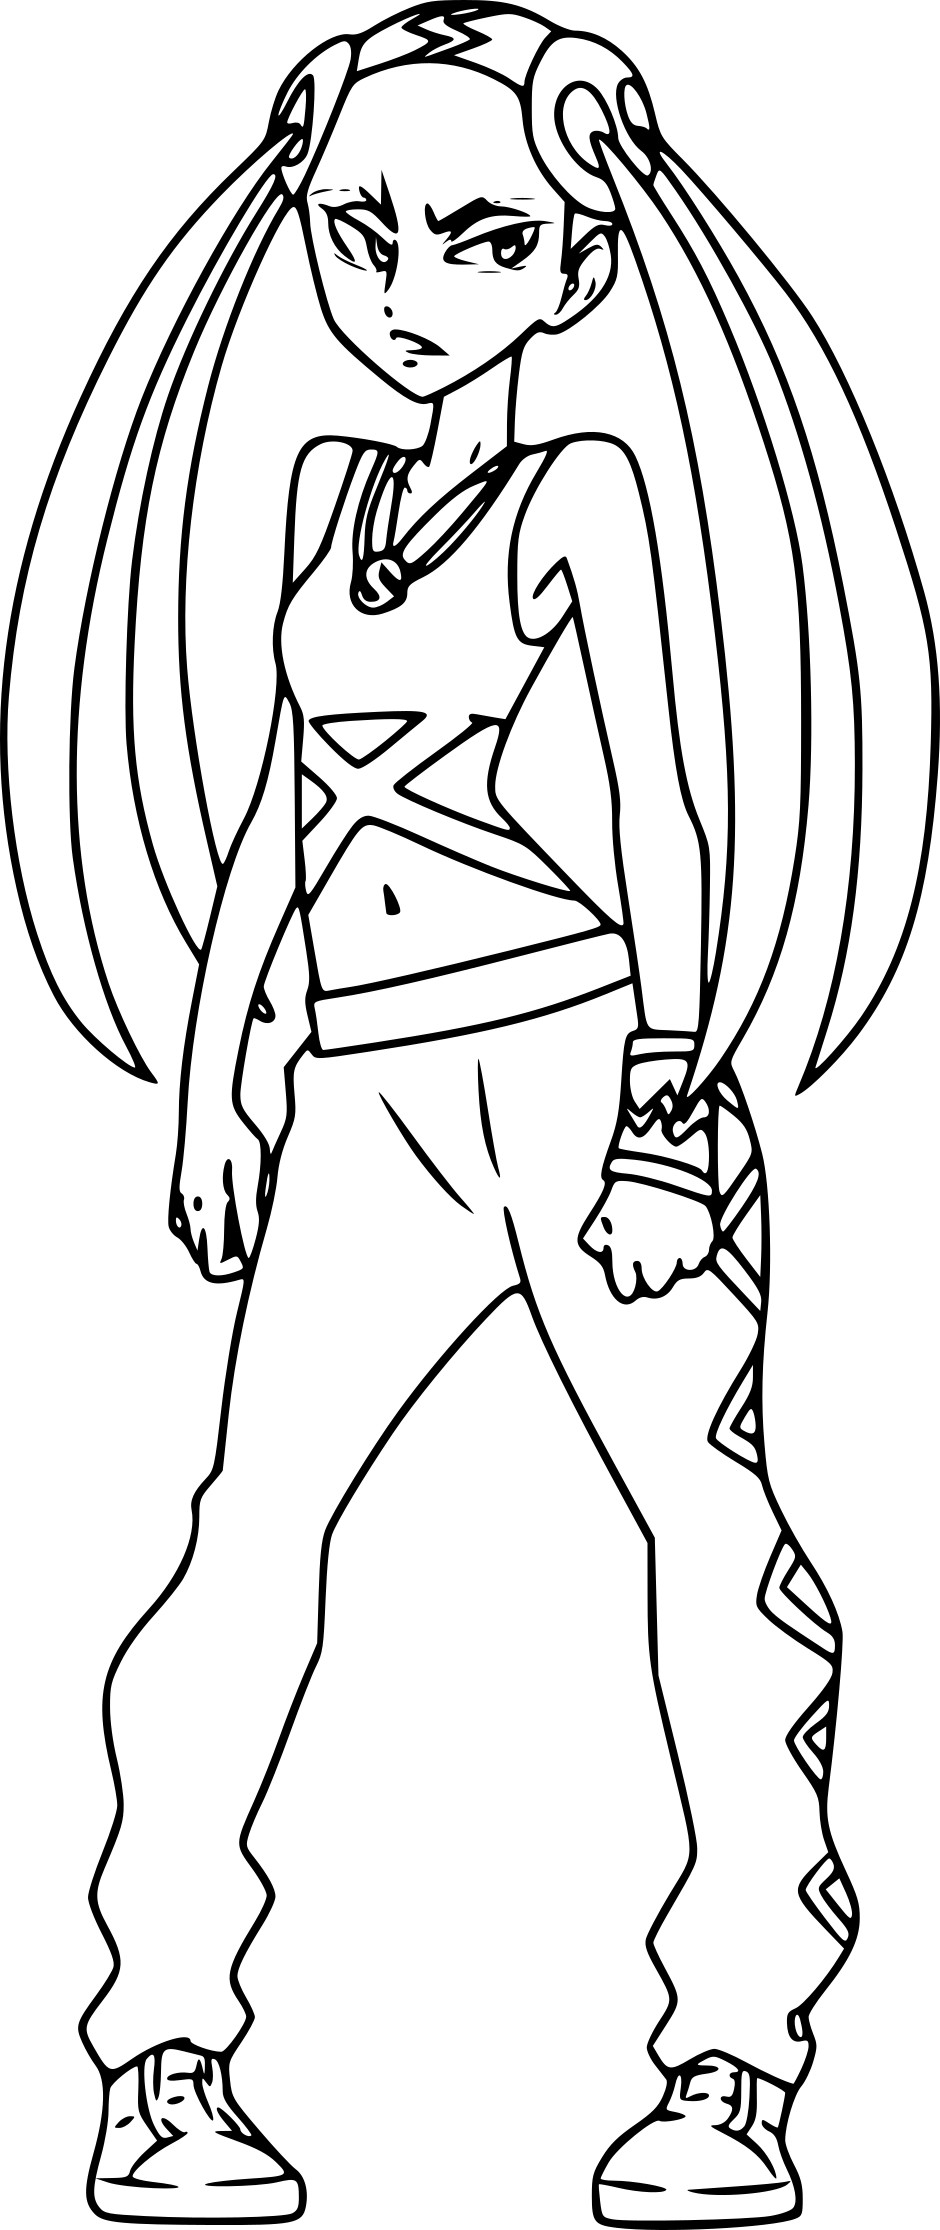 Apocyne Pokemon coloring page